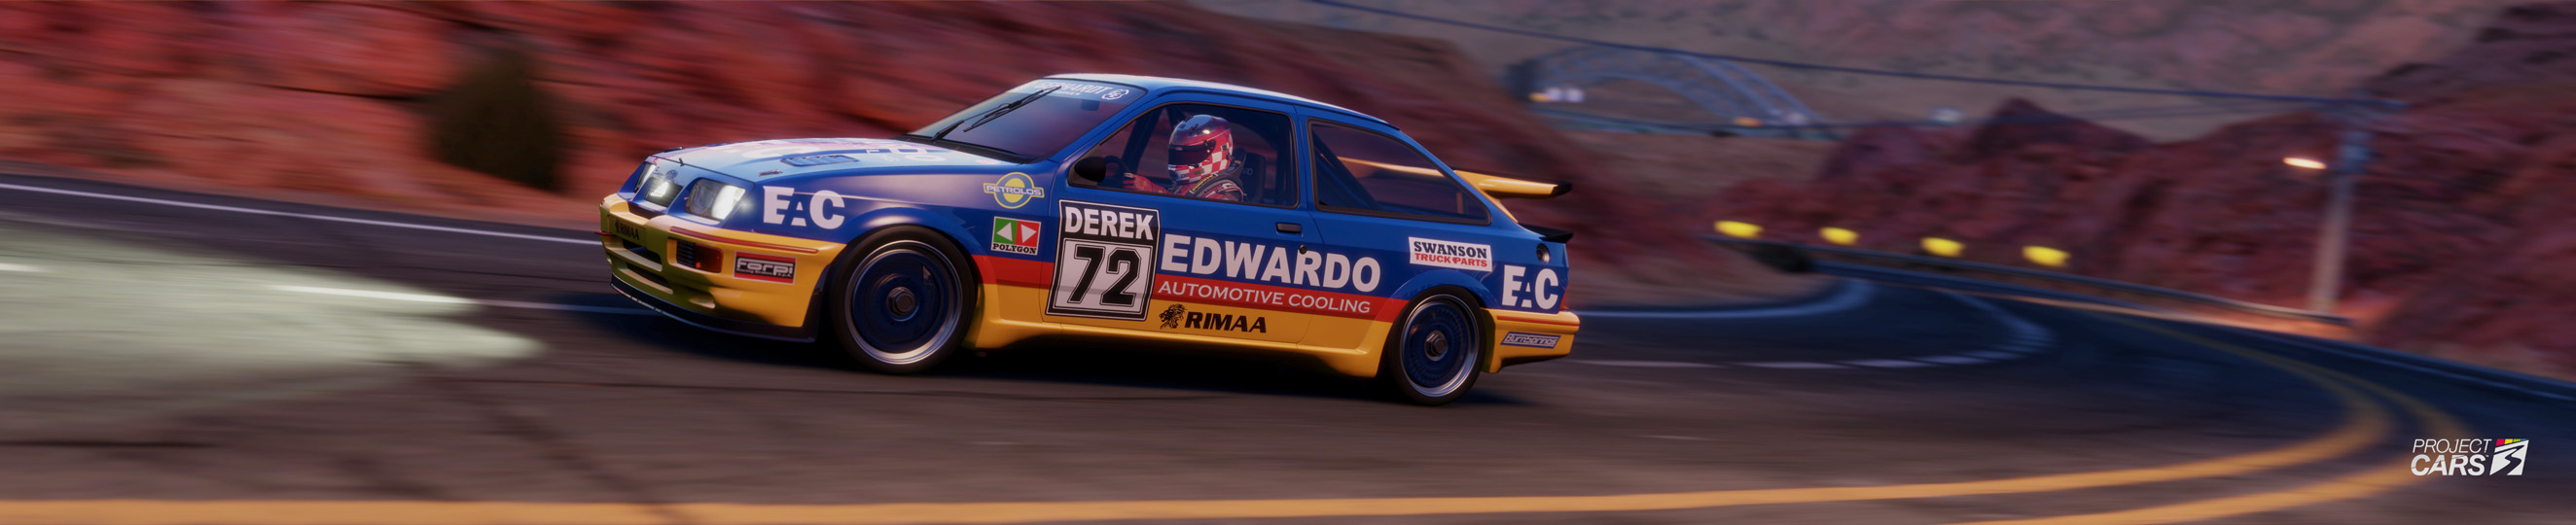 0a PROJECT CARS 3 COSWORTH at MONUMENT CANYON crop copy.jpg